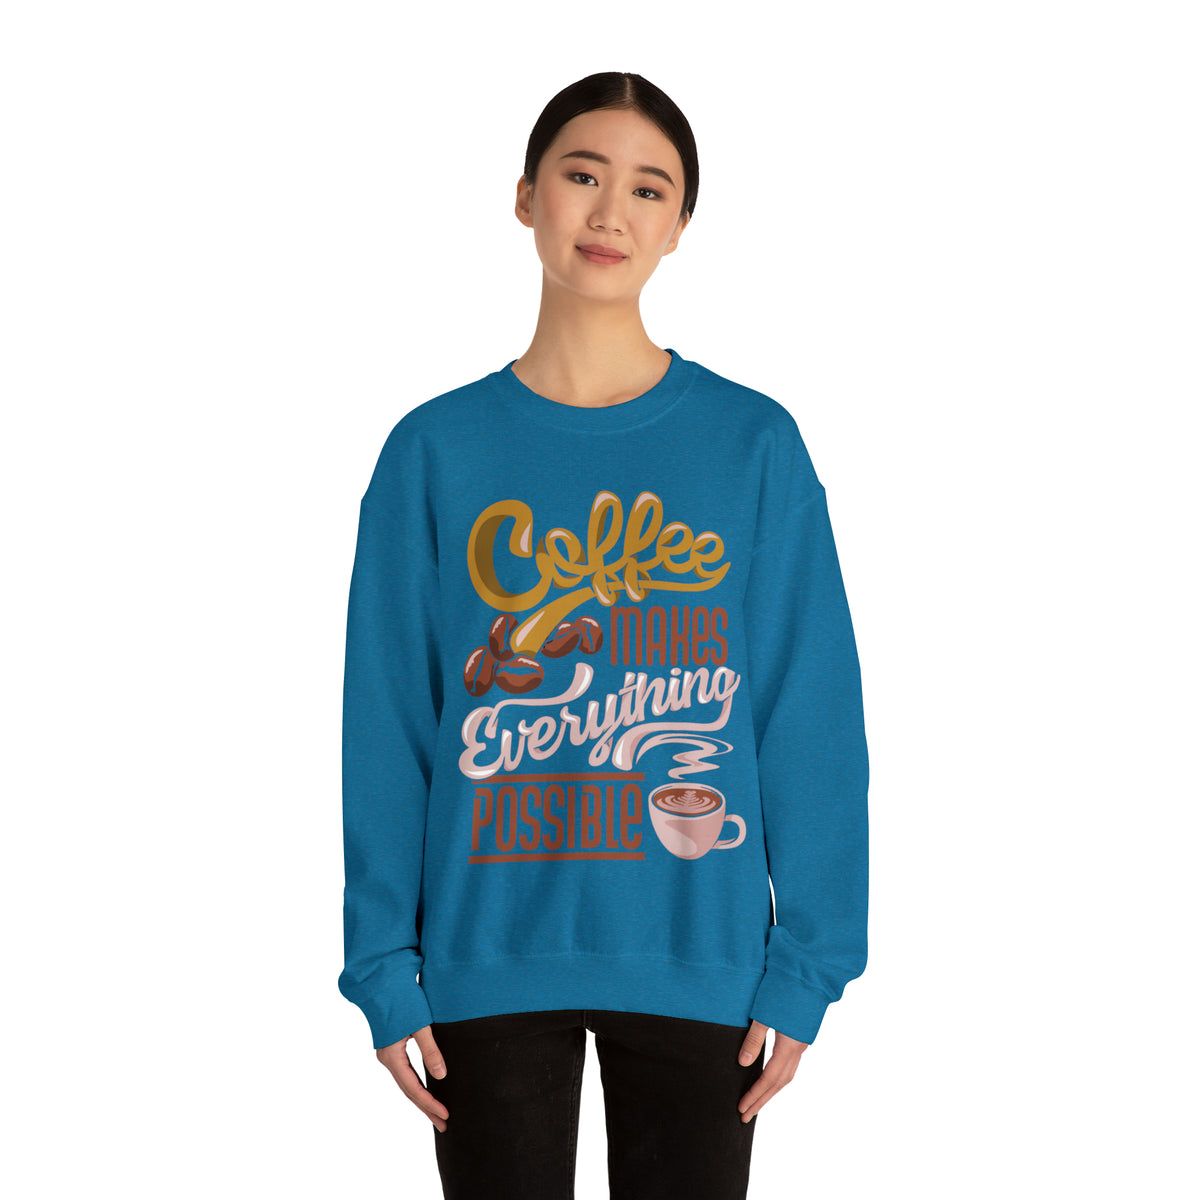 Coffee Makes Everything Possible Sweatshirt, Coffee sweater, Cute Coffee lovers Sweatshirt, Trendy sweater, Sweatshirts, Cute Sweatshirt, Oversized Fit, Cozy Sweaters